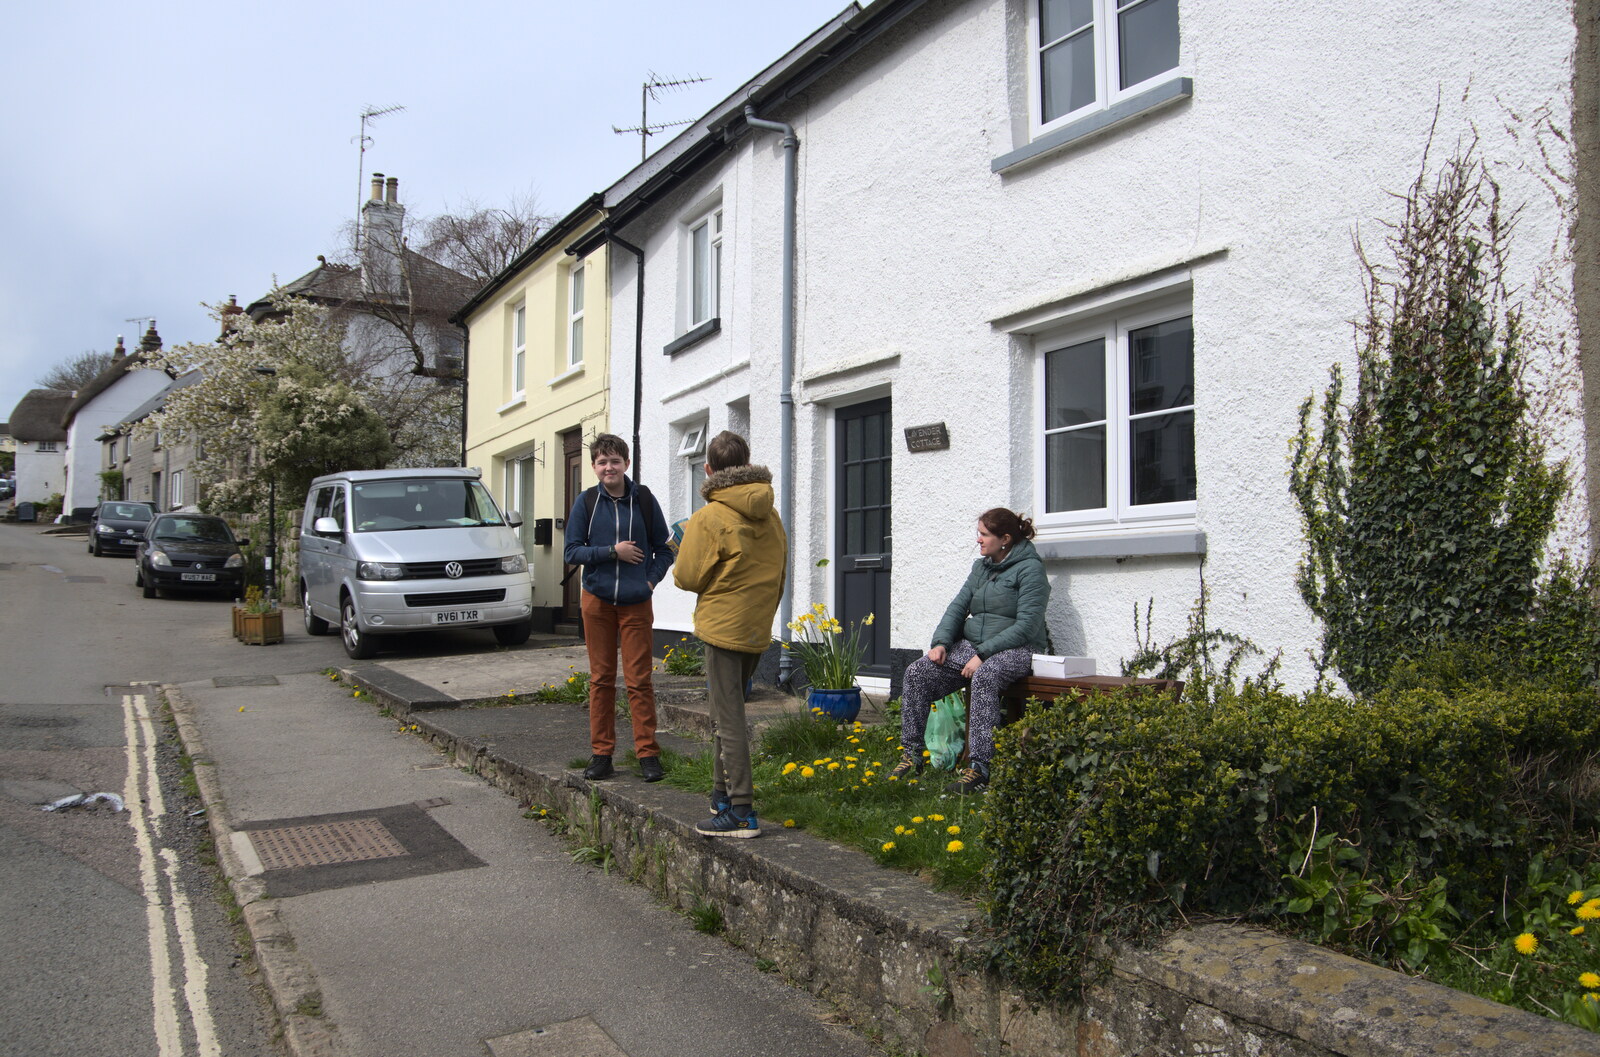 The gang hangs around in front of the cottage from Easter in South Zeal and Moretonhampstead, Devon - 9th April